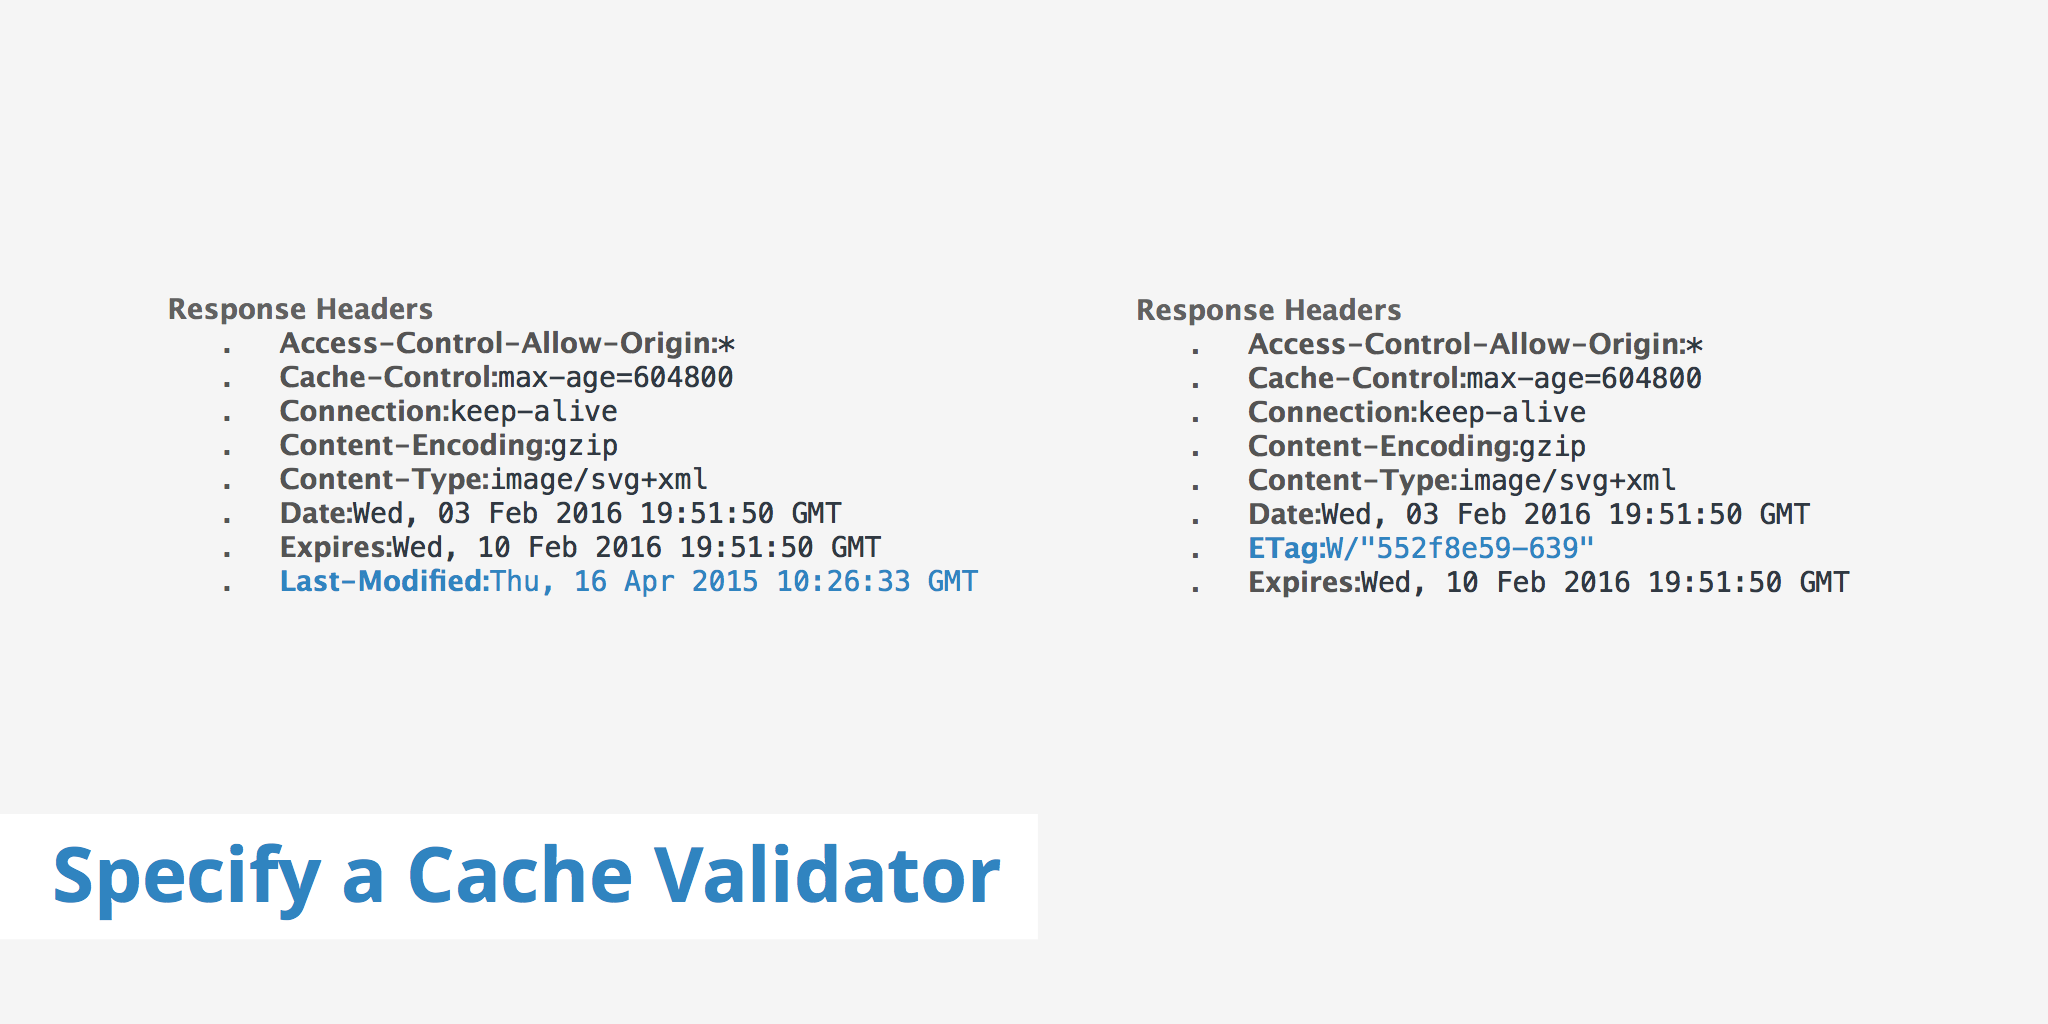 How to Specify a Cache Validator